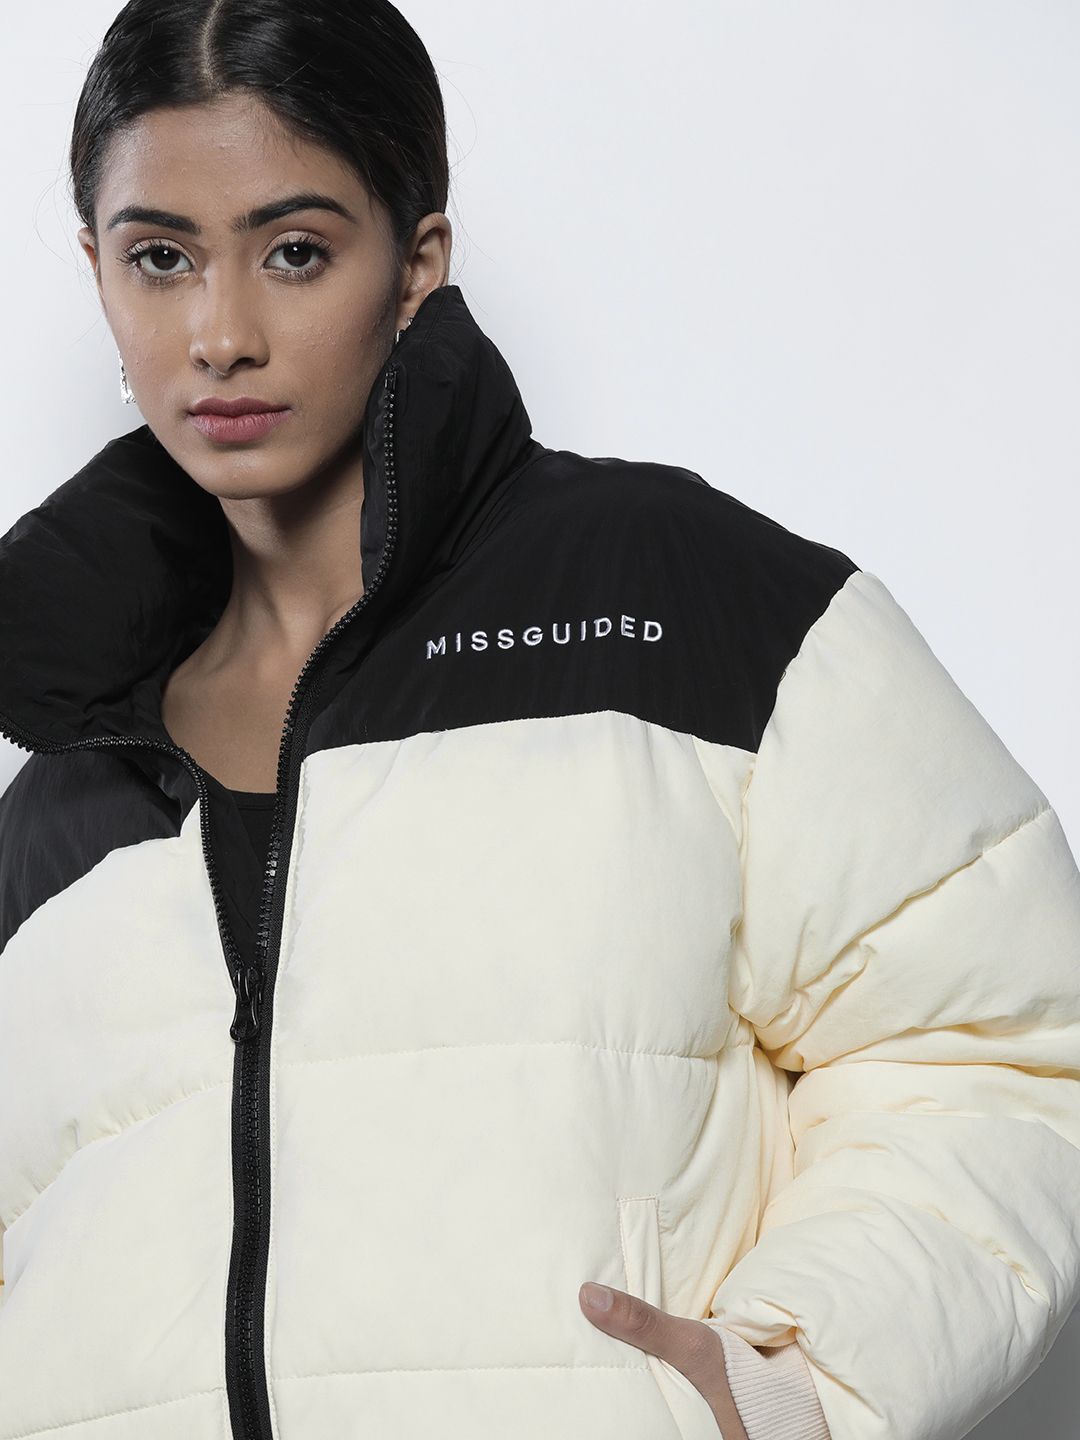 Missguided Petite Women Off-White & Black Colourblocked Puffer Jacket Price in India